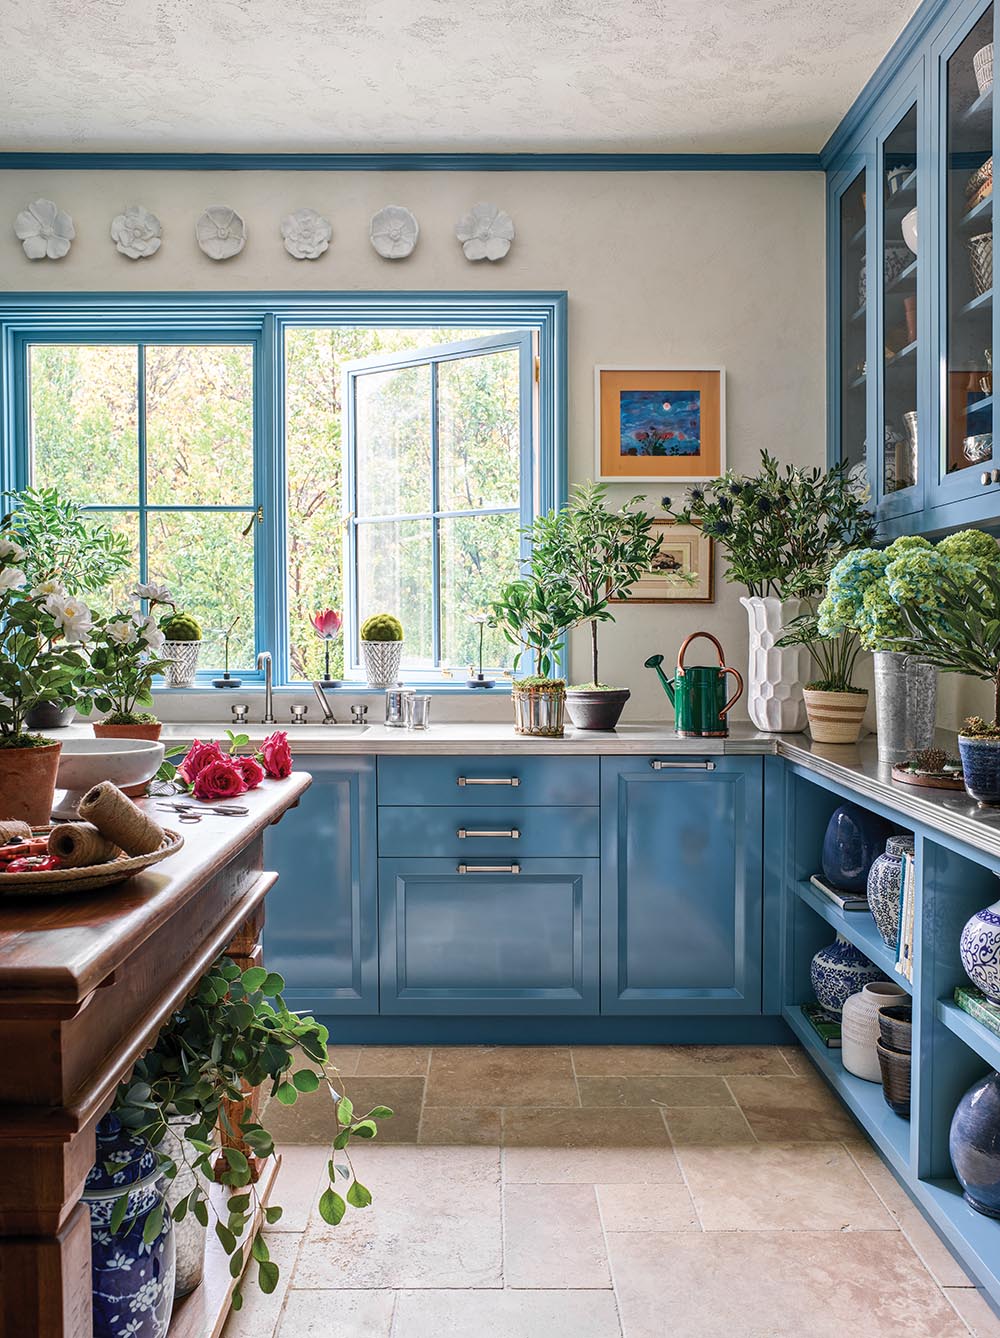 Glossy blue cabinets in a flower cutting room/laundry room designed by Bunny Williams.